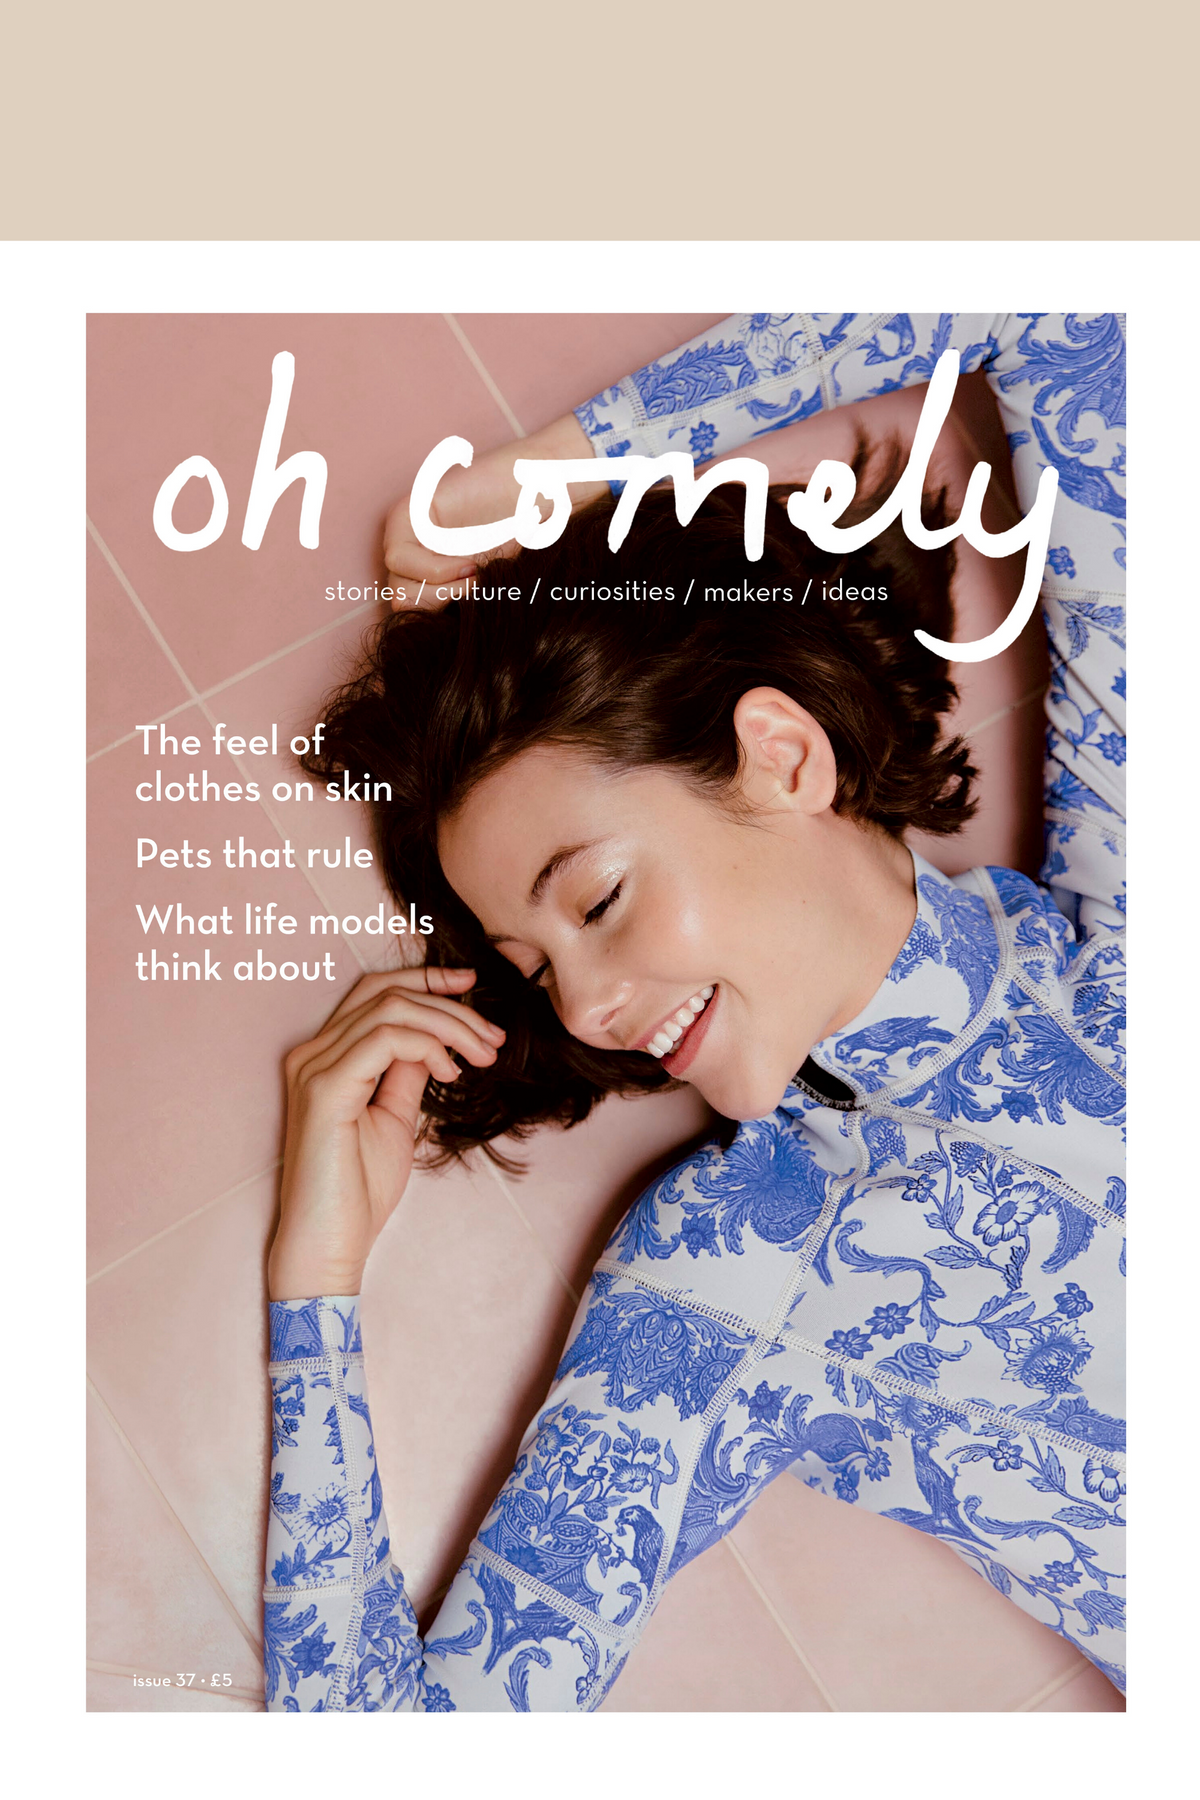 Oh Comely - Issue 37